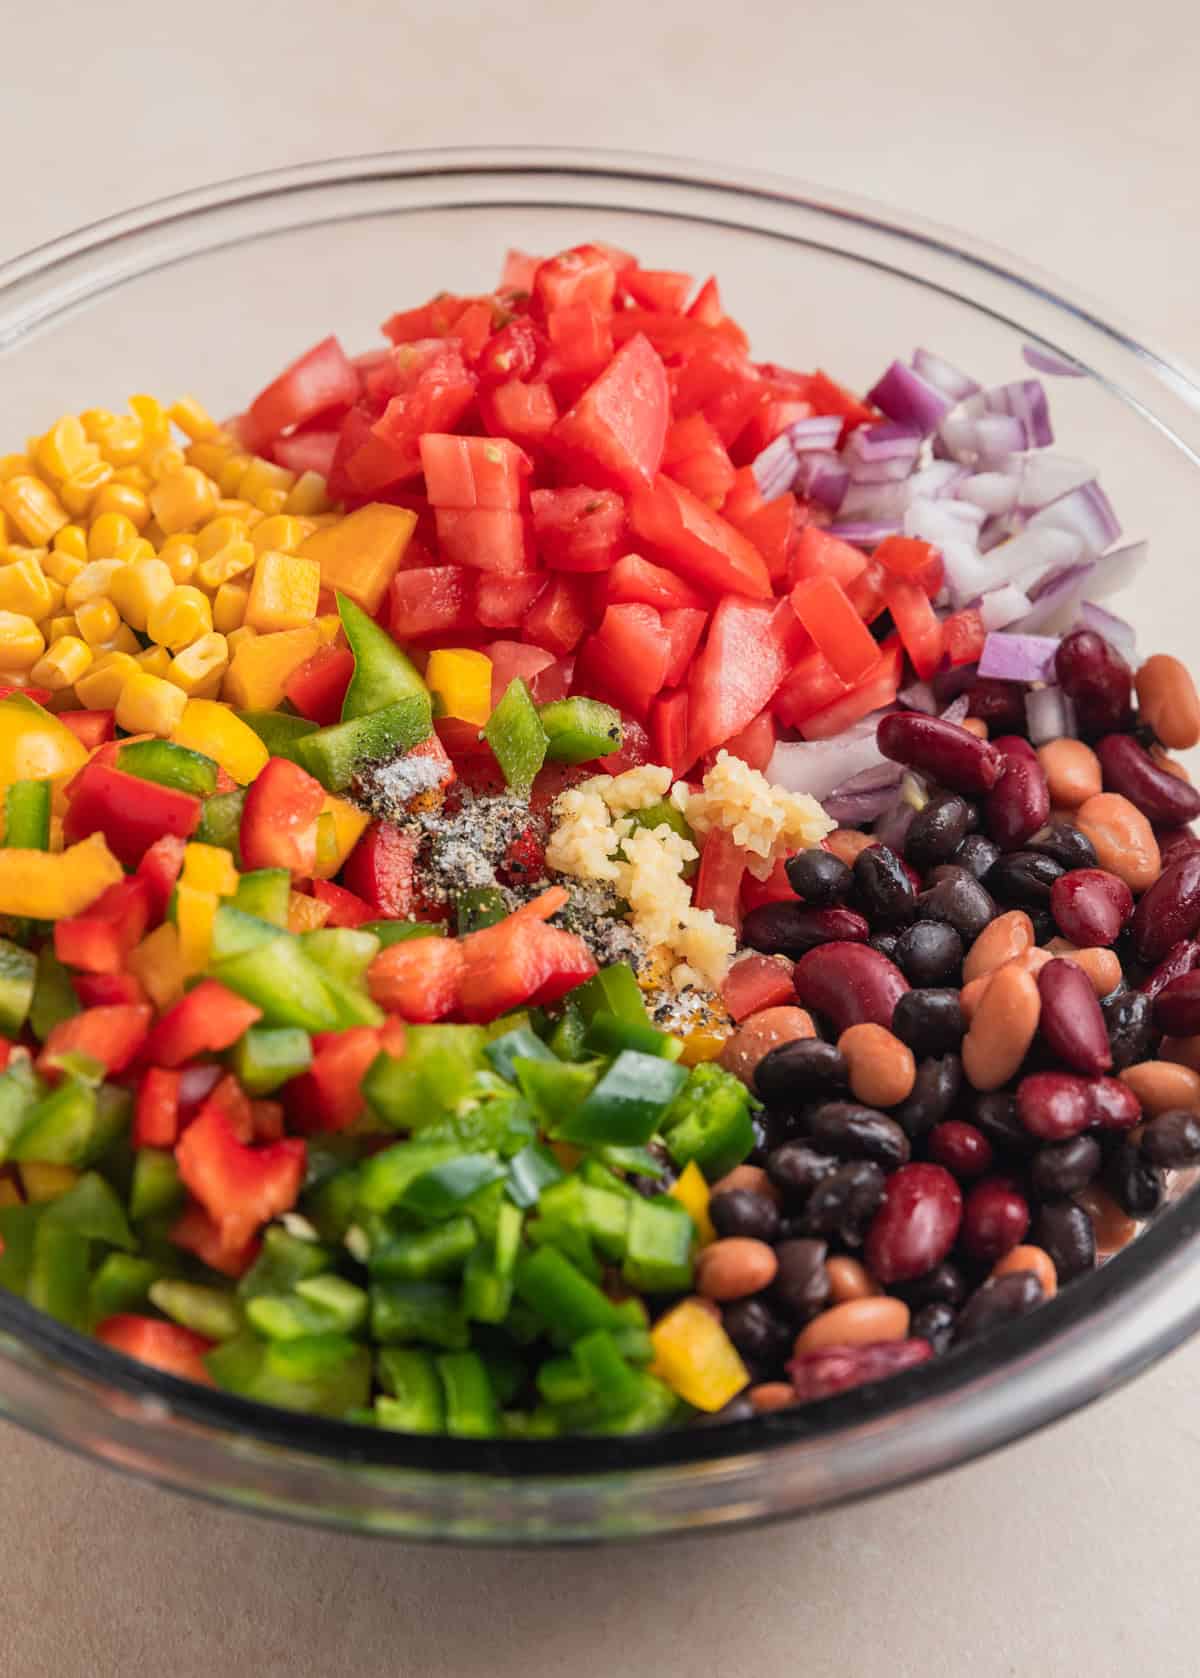 Diced tomatoes, pinto beans, black beans, kidney beans, chopped peppers and other ingredients in mixing bowl.